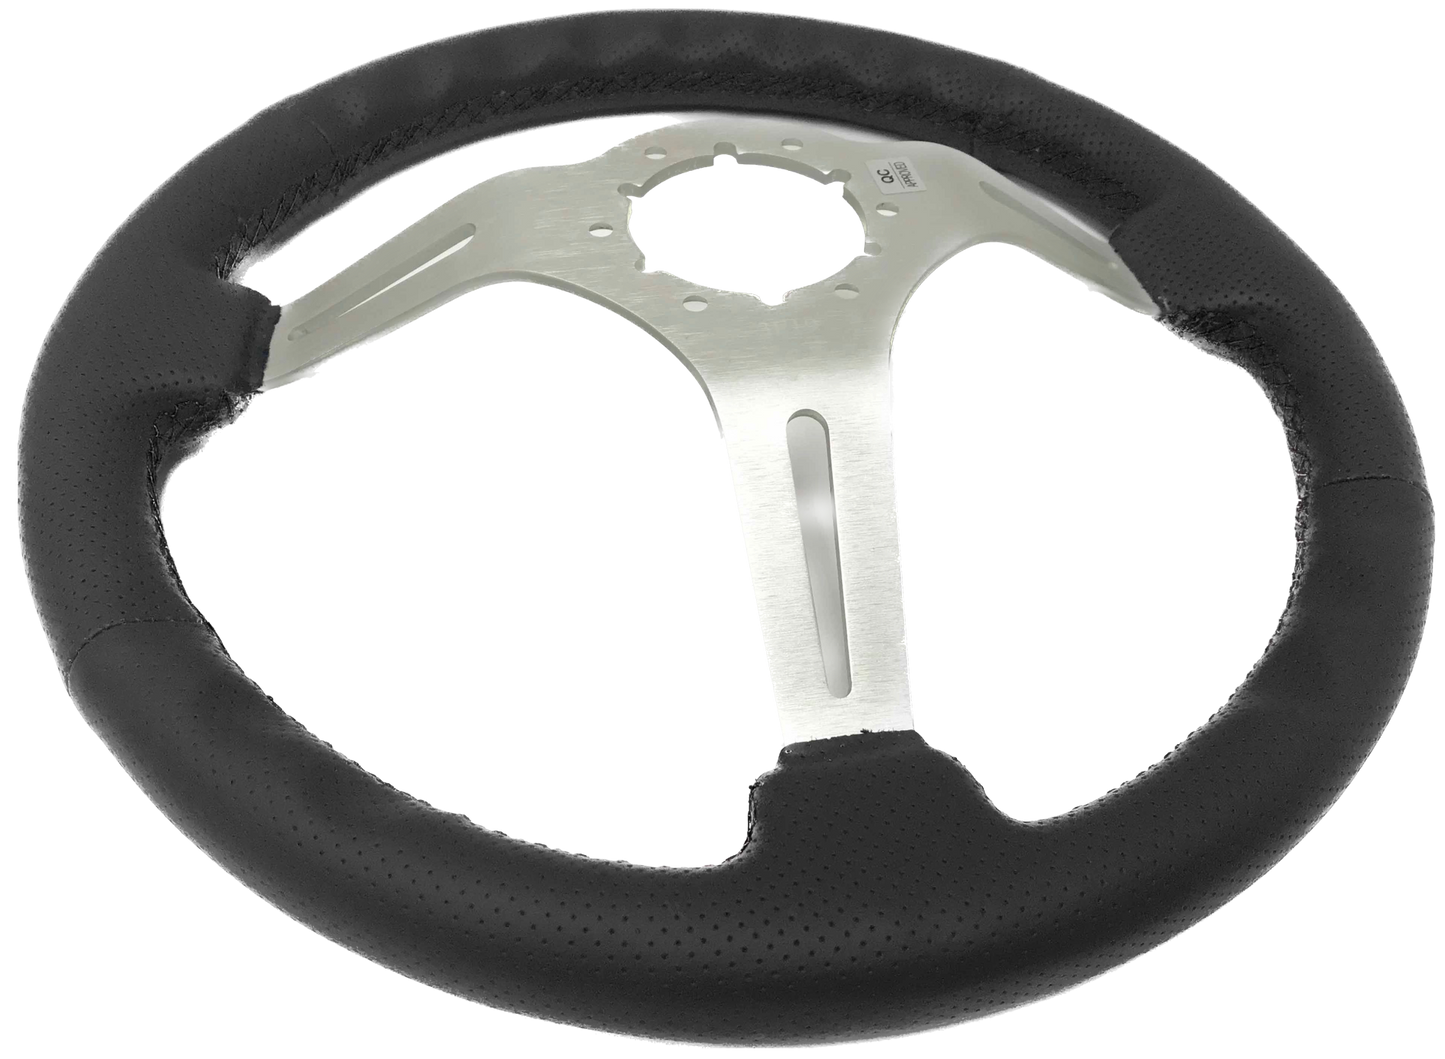 1969-89 Cadillac Steering Wheel Kit | Perforated Leather | ST3587BLK-BLK